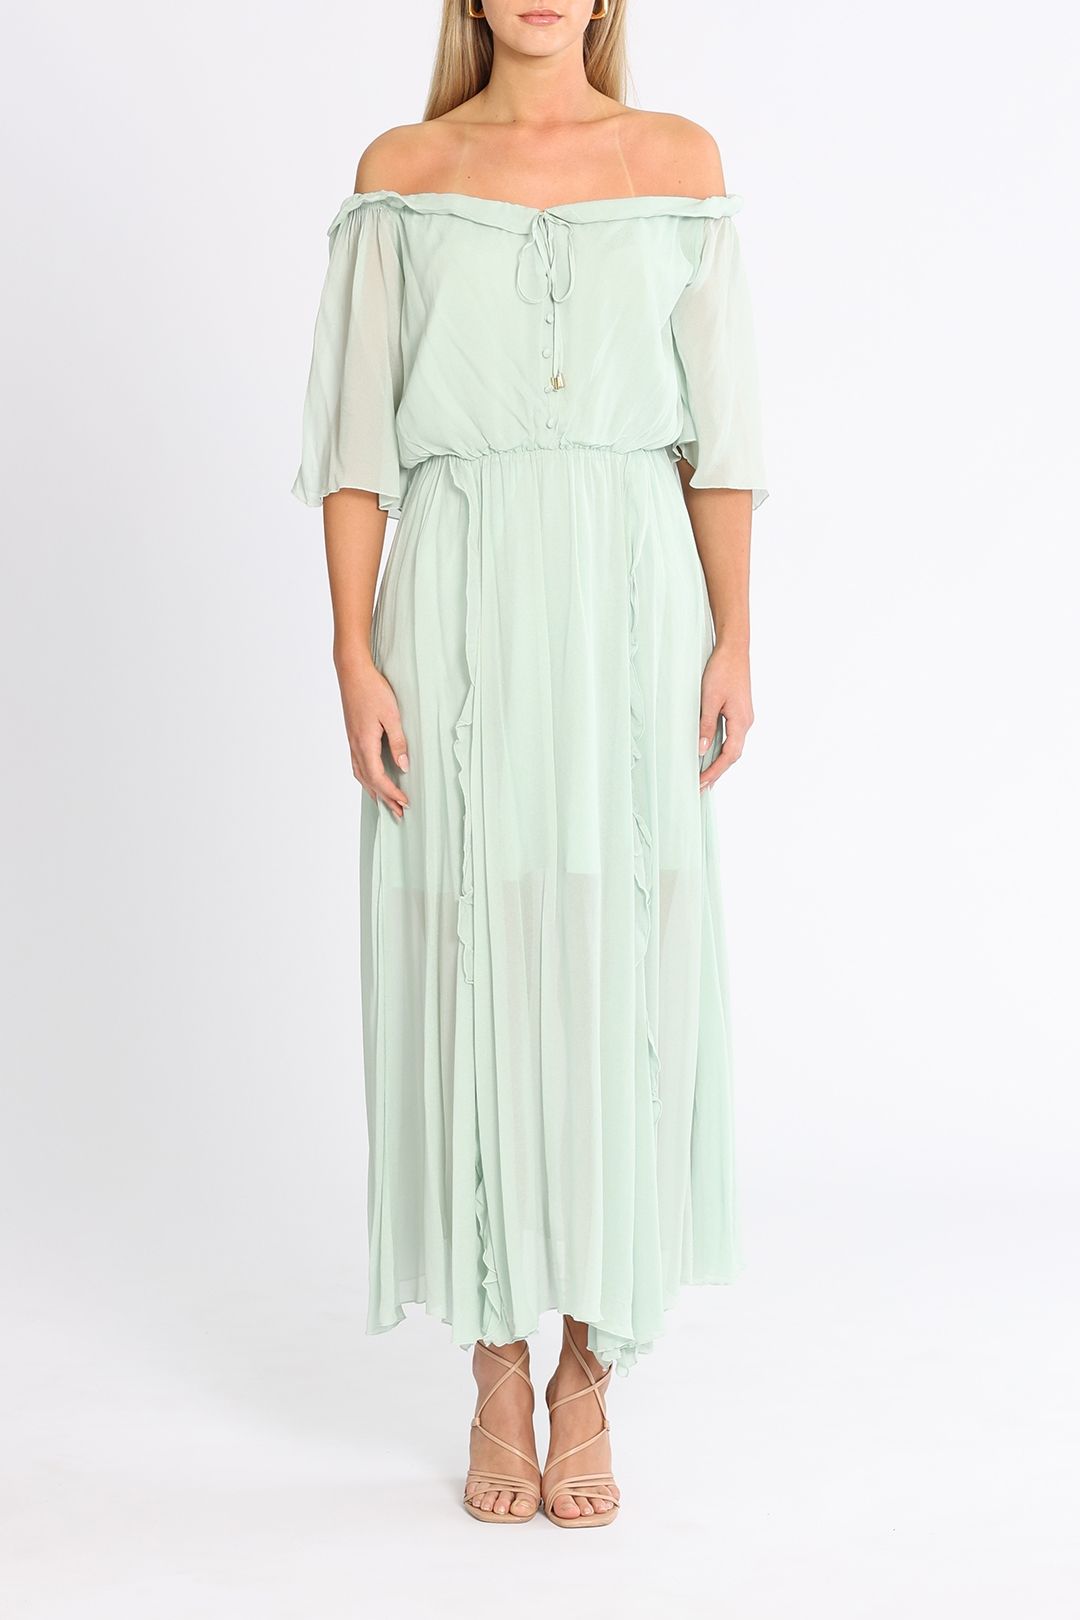 Belle and Bloom Amour Amour Ruffled Maxi Dress Green